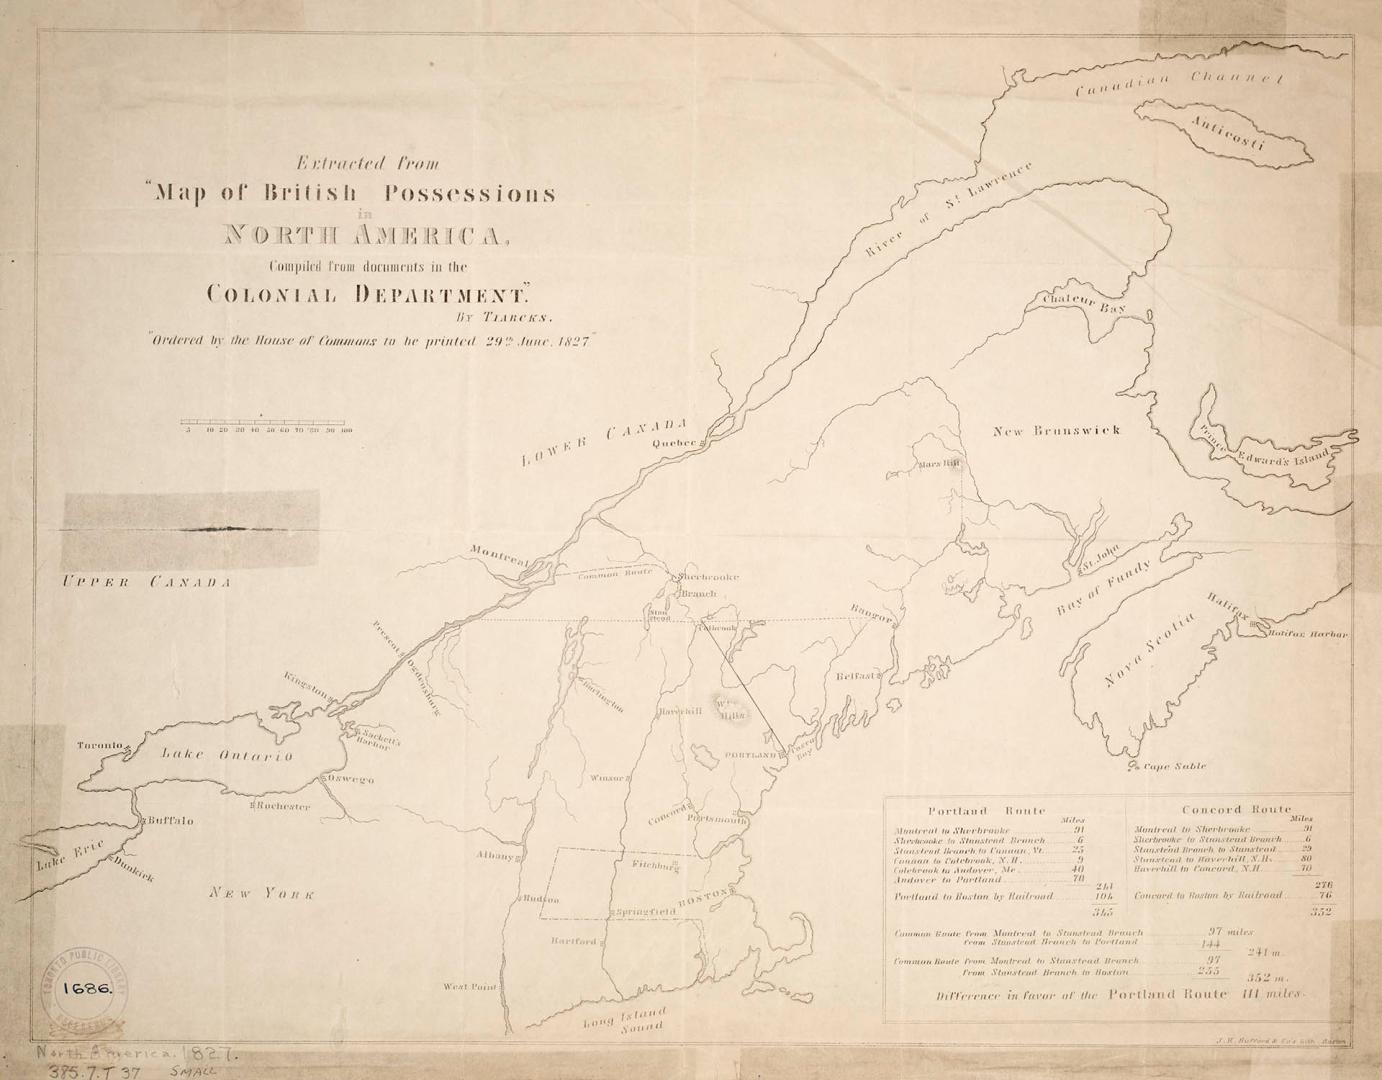 Extracted from ''Map of British possessions in North America, compiled from documents in the Colonial Department